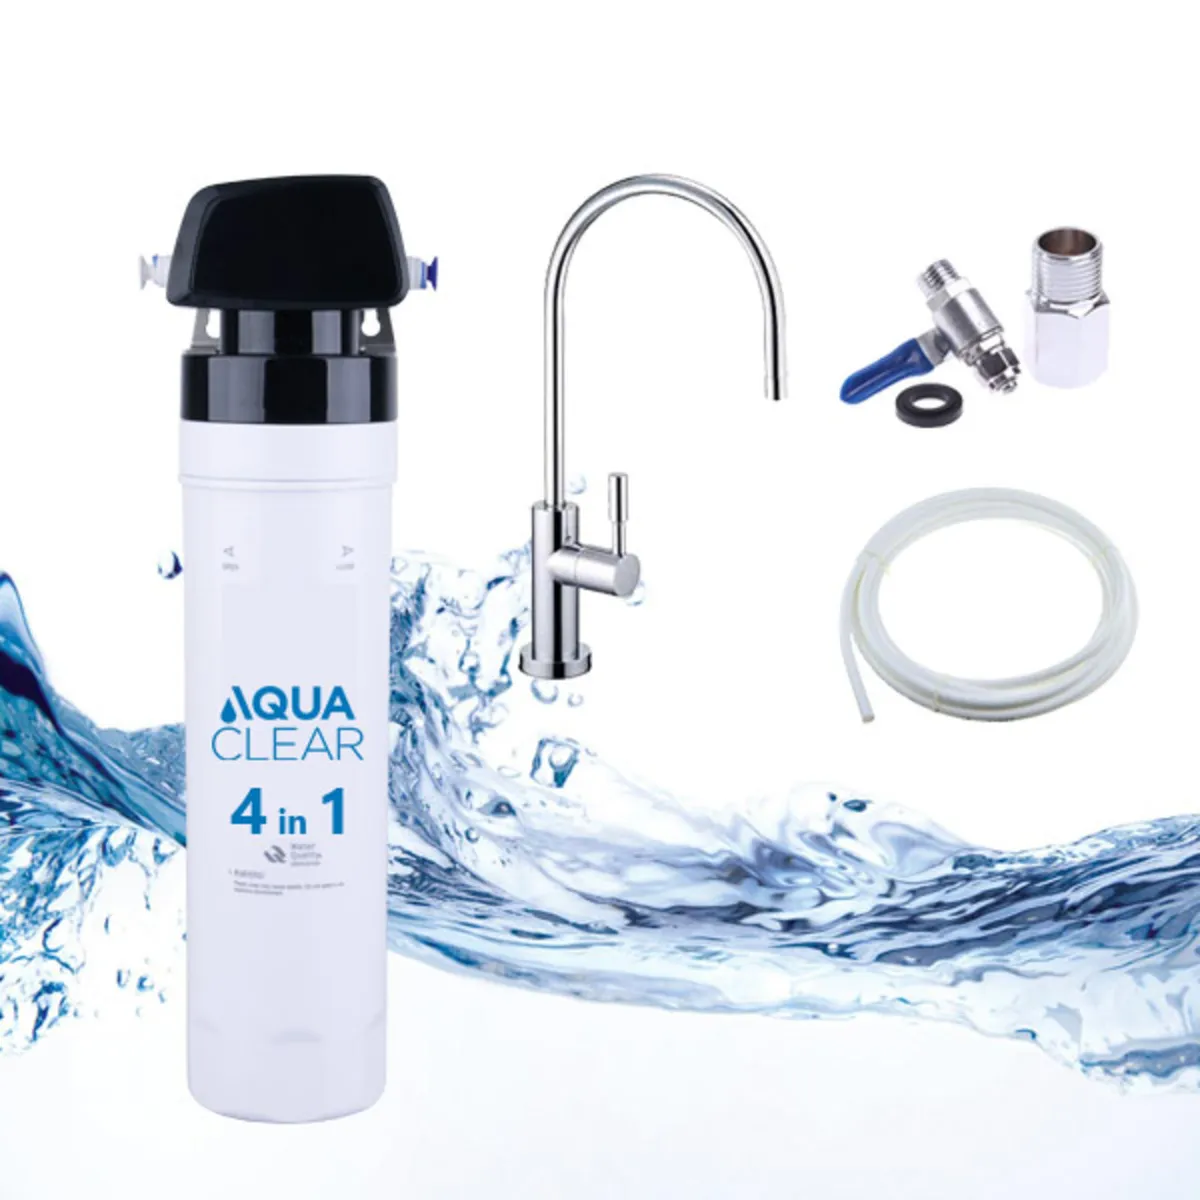 Aquaclear 4in1 Filter & Tap - Image 1